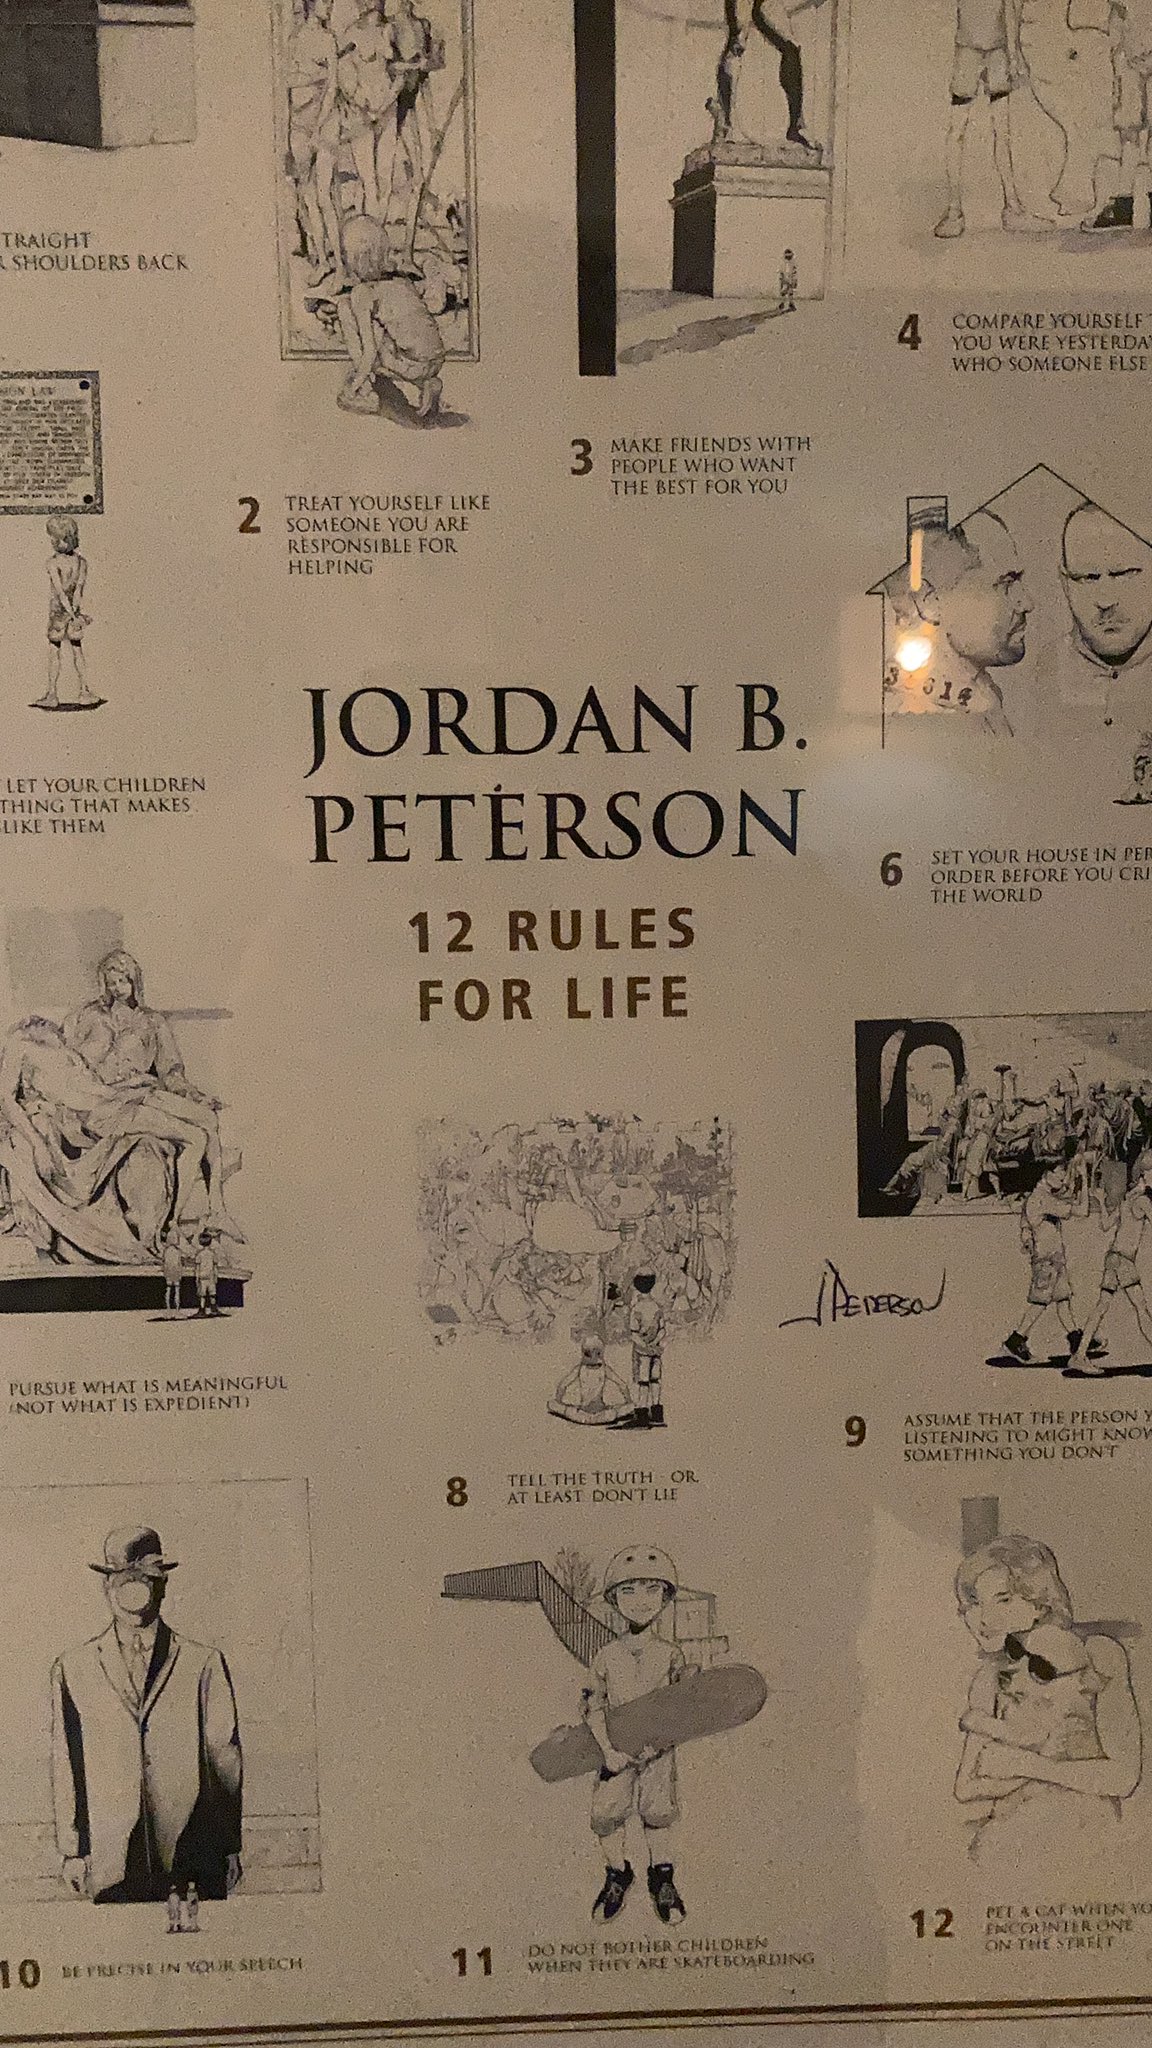 Booth boksning interpersonel Dr Jordan B Peterson on Twitter: "Poster made up of 12 More Rules now  available here: https://t.co/5qjPAOfKd1 https://t.co/SeS021VSFt" / Twitter